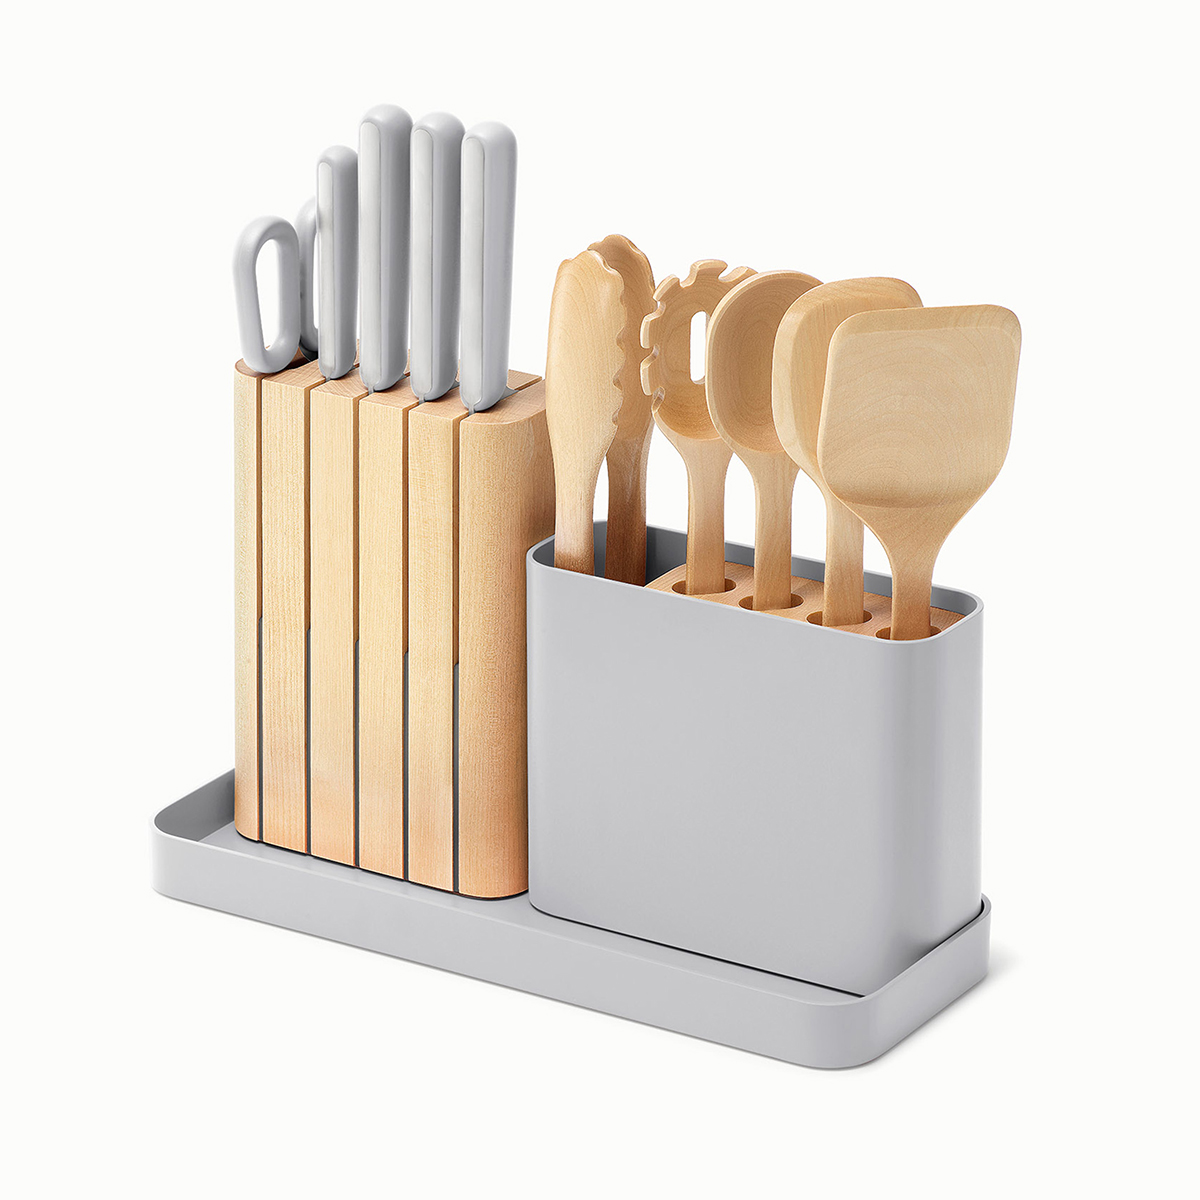 Caraway Home 14 Piece Knife and Utensil Set Gray Pkg/14